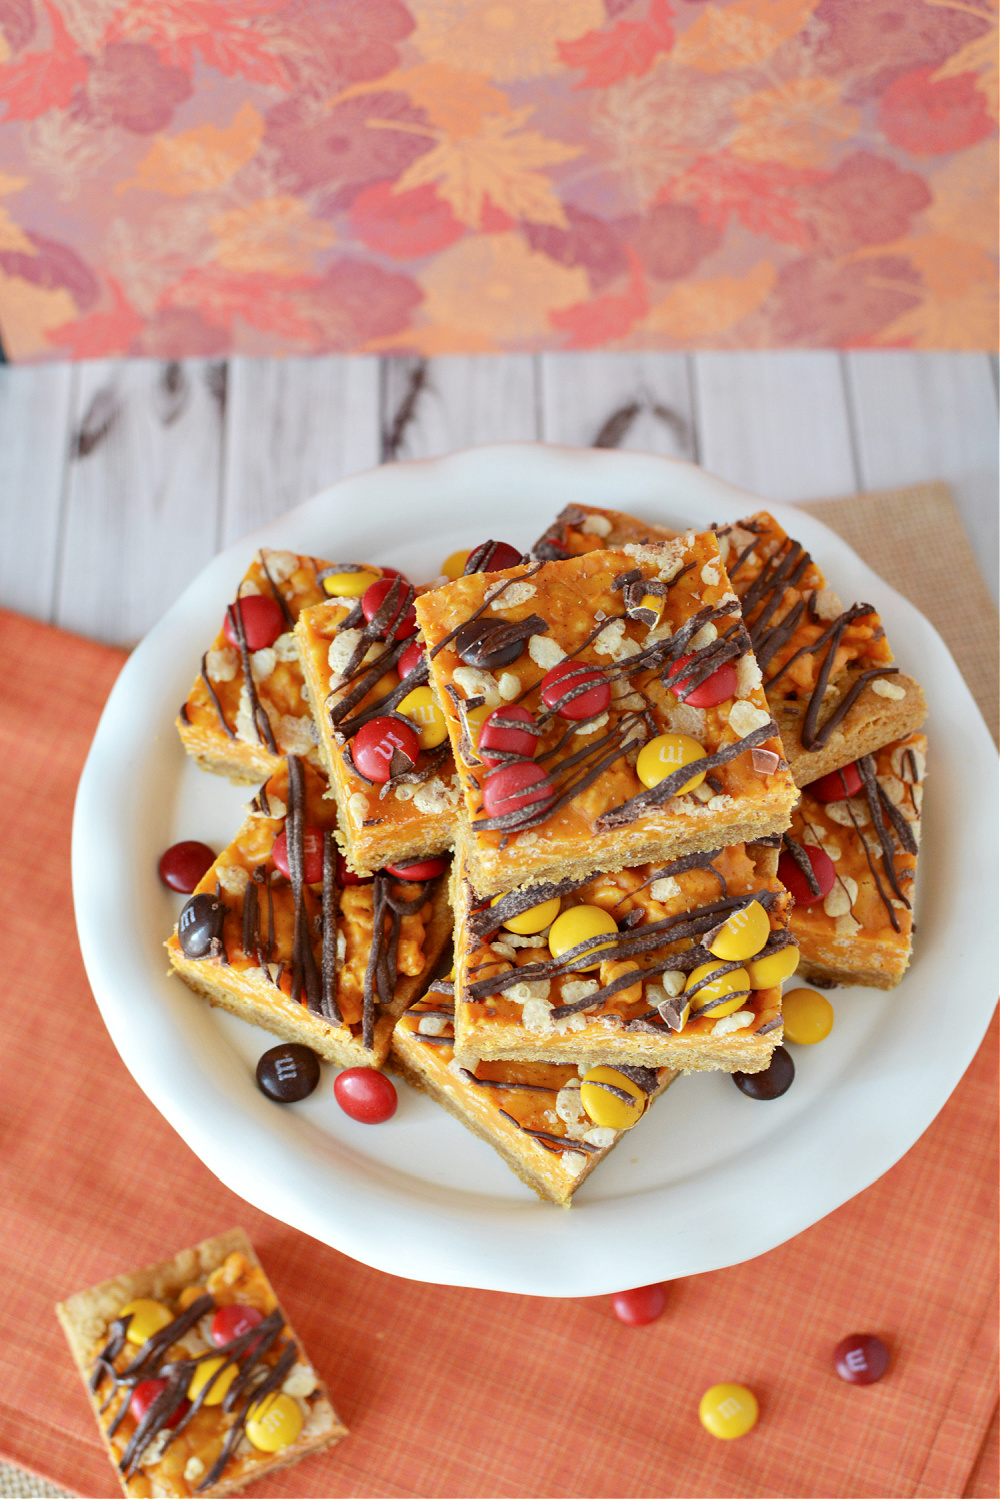 Pumpkin bars filled with spice, chocolate candies, and drizzled with chocolate 